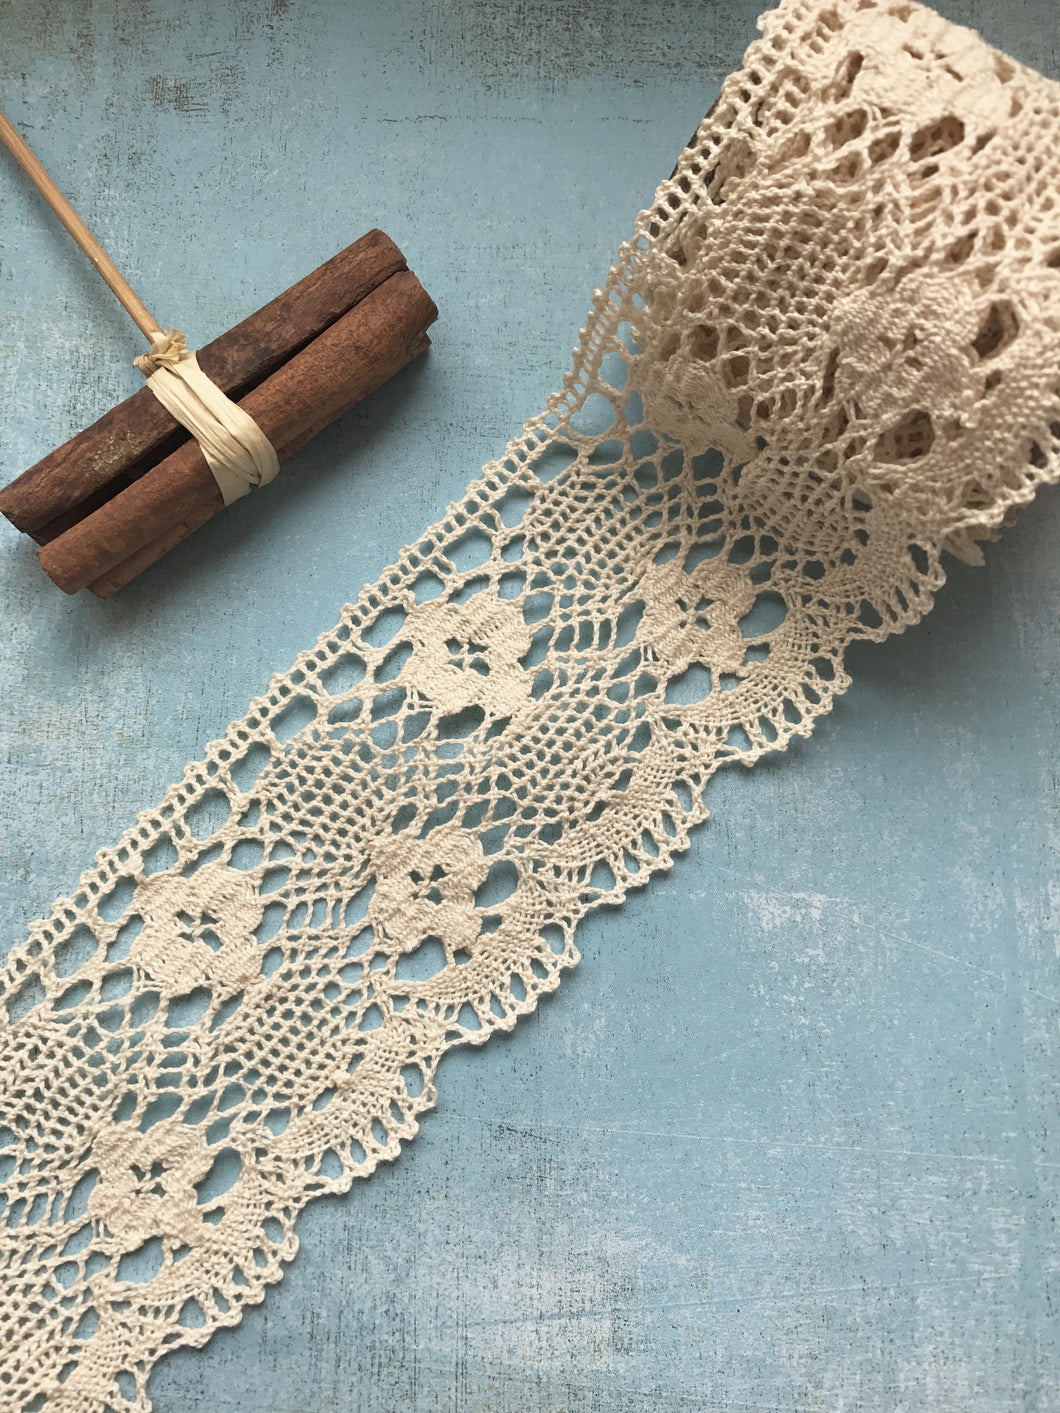 Ecru Lace Natural Cotton Cluny Nottingham 75 mm/3 www.thelaceco